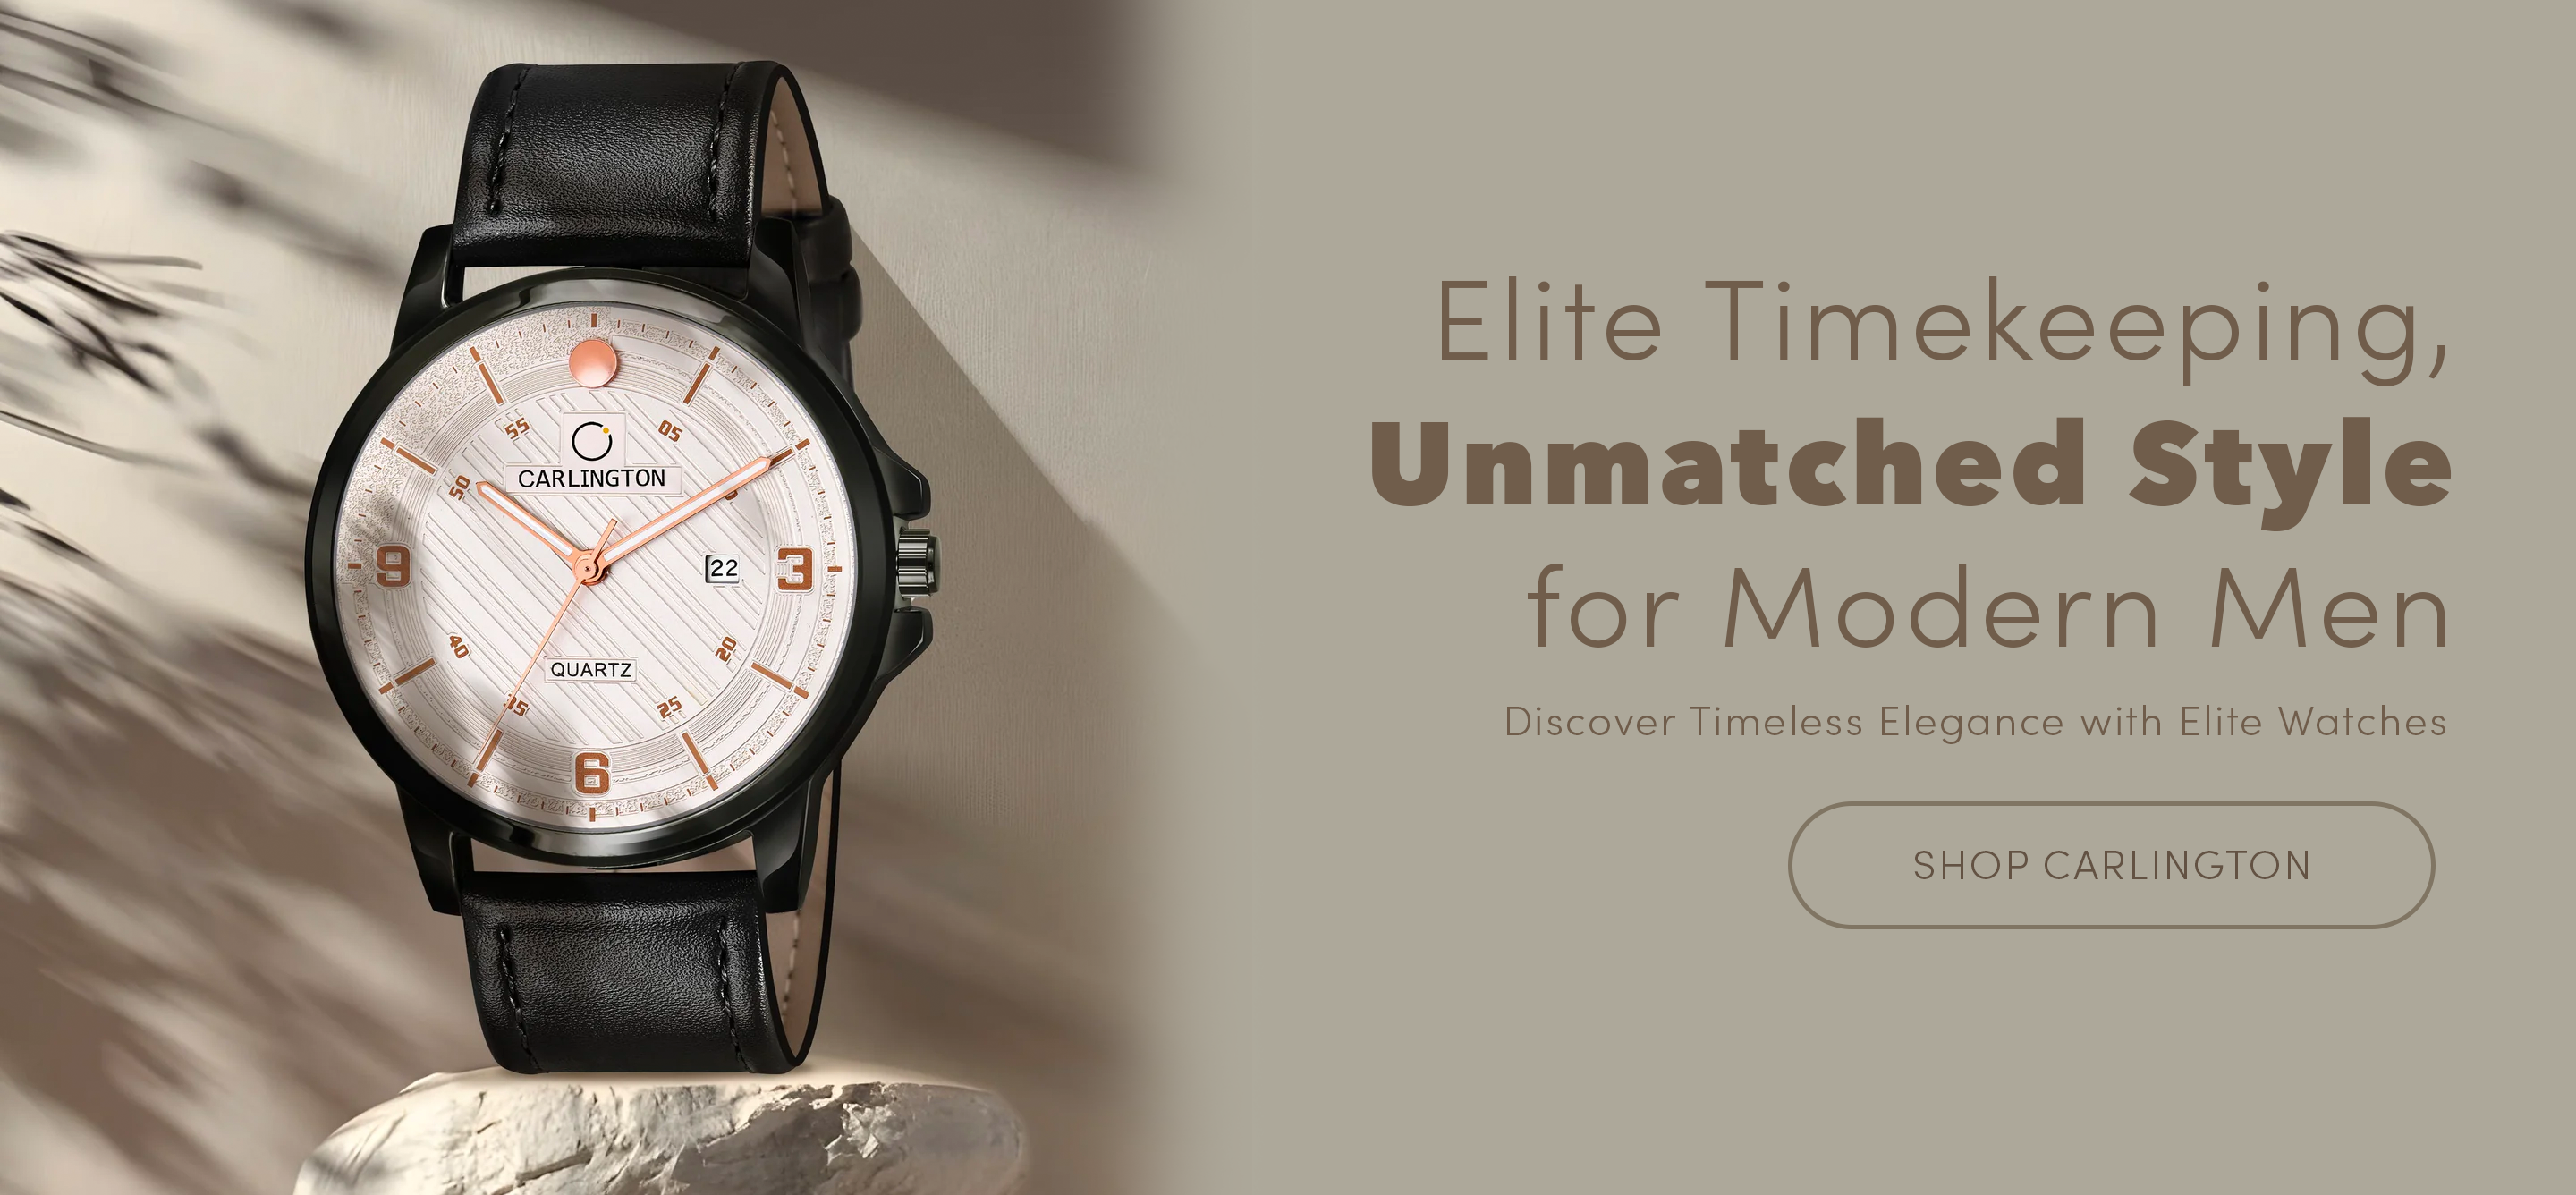 Name: Elite Model's Fashion Watches Category: These are Affordable luxury,  ladies dress watches from France… | Ladies dress watches, Fashion watches,  Chrono watches